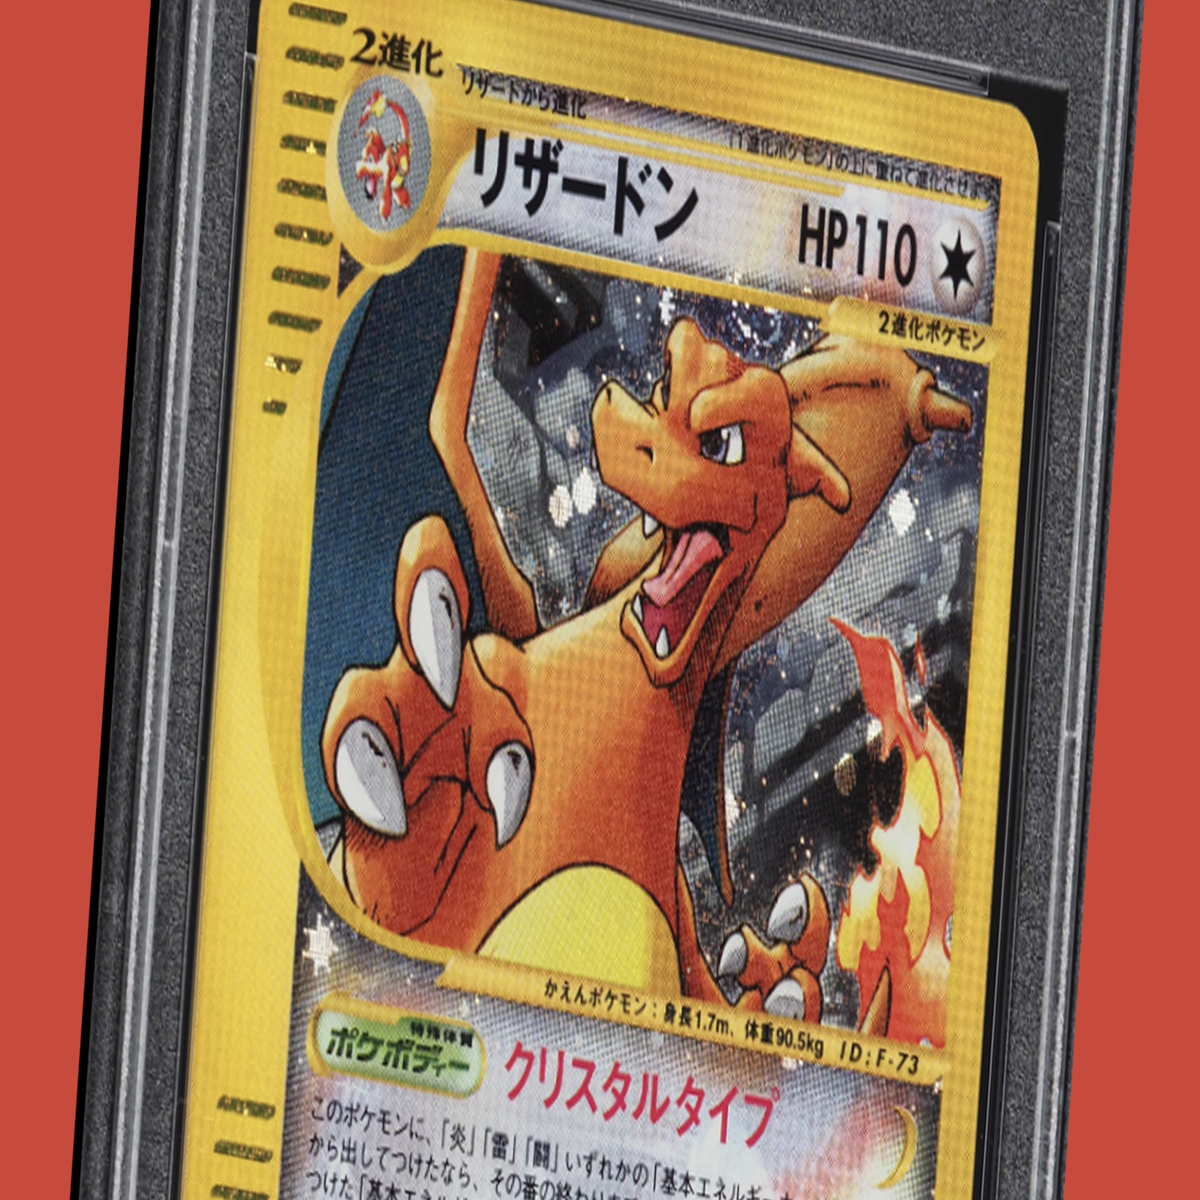 Pokémon Charizard card sold for whopping $420K at auction